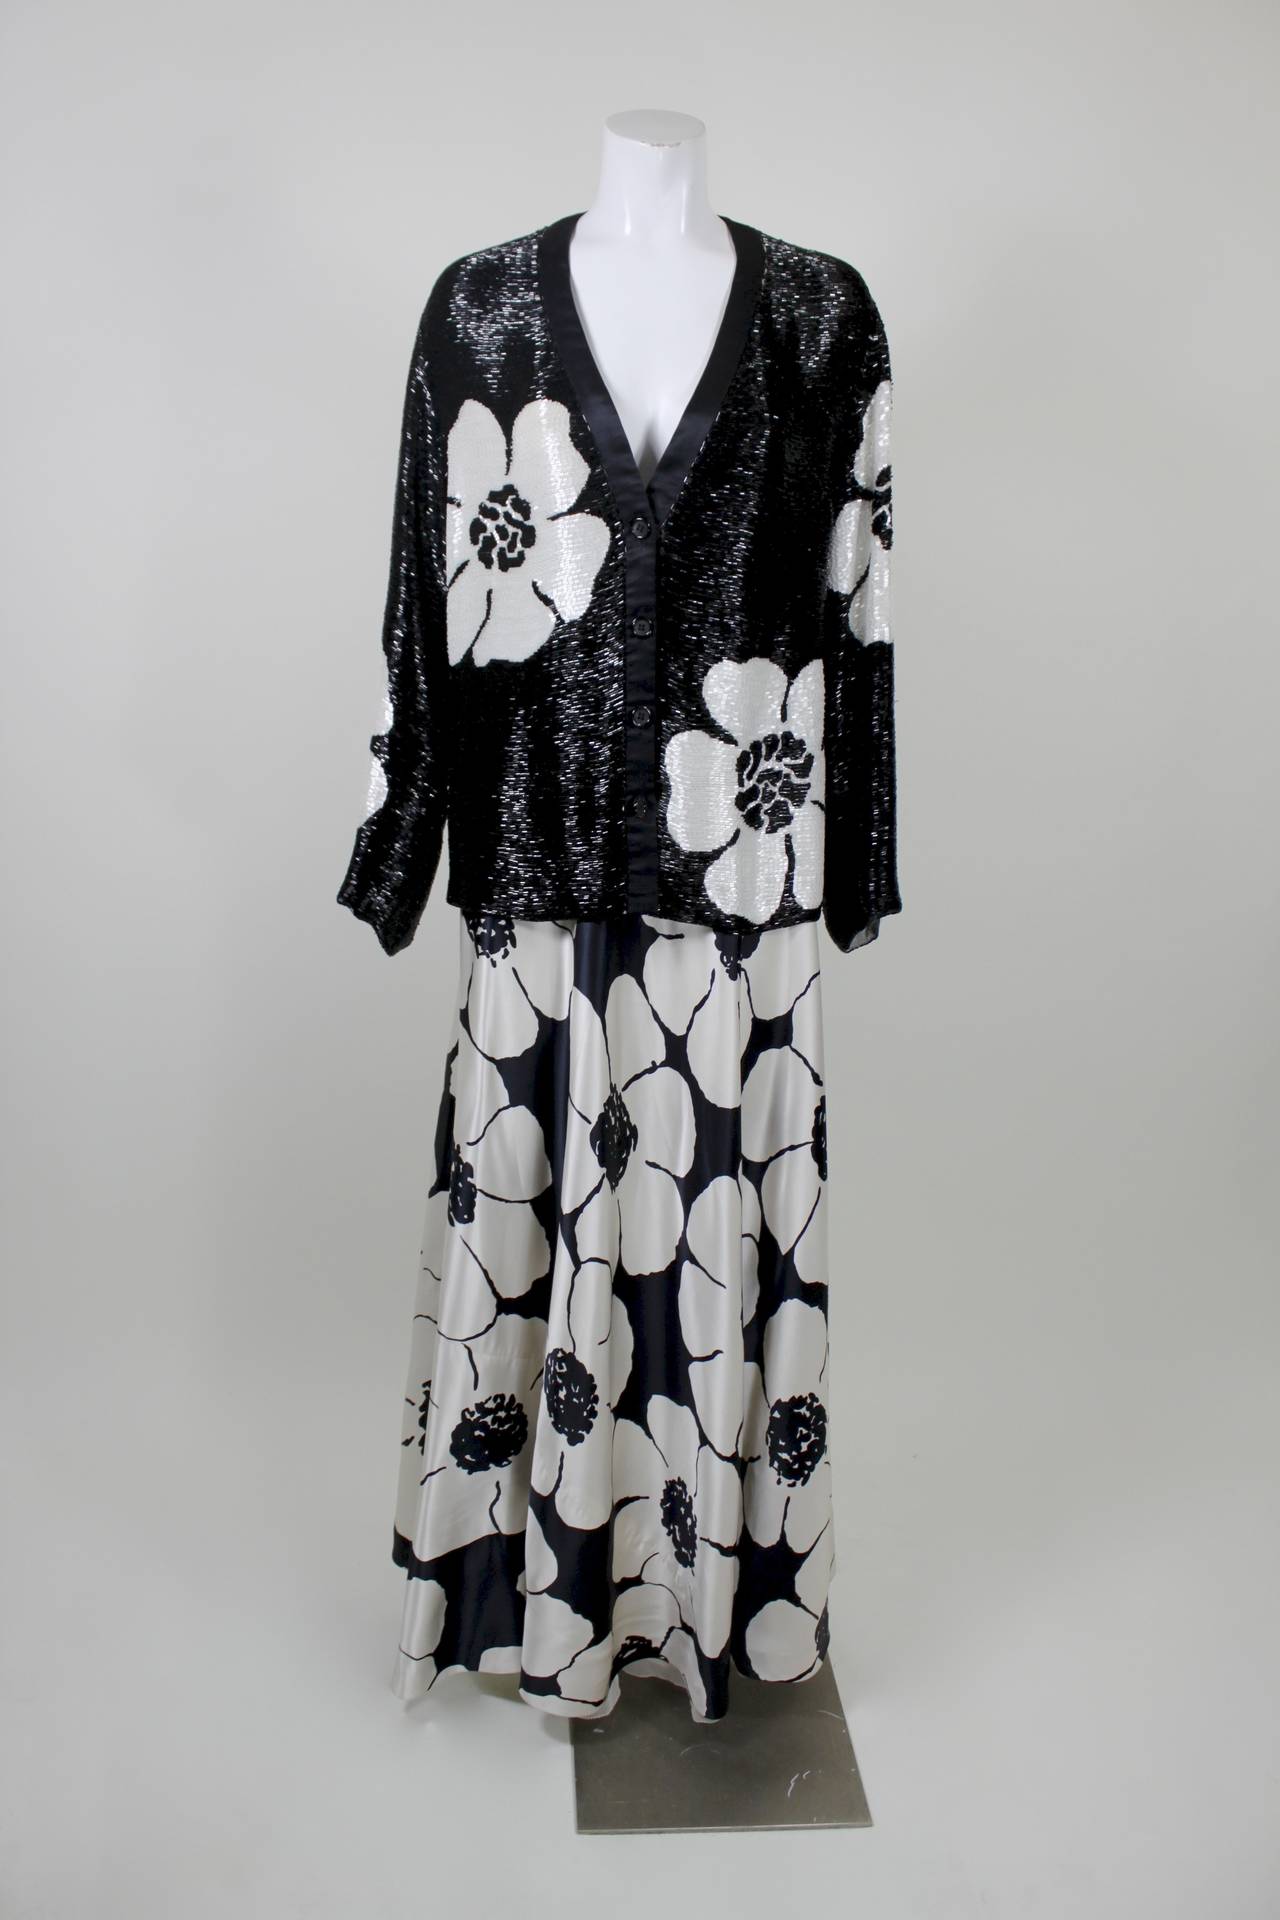 A gorgeous evening ensemble from renowned American designer James Galanos. The top, a cardigan silhouette, is completely covered in dense bugle beading in a floral motif. While slightly oversized, the cut of the top is still sexy and chic.